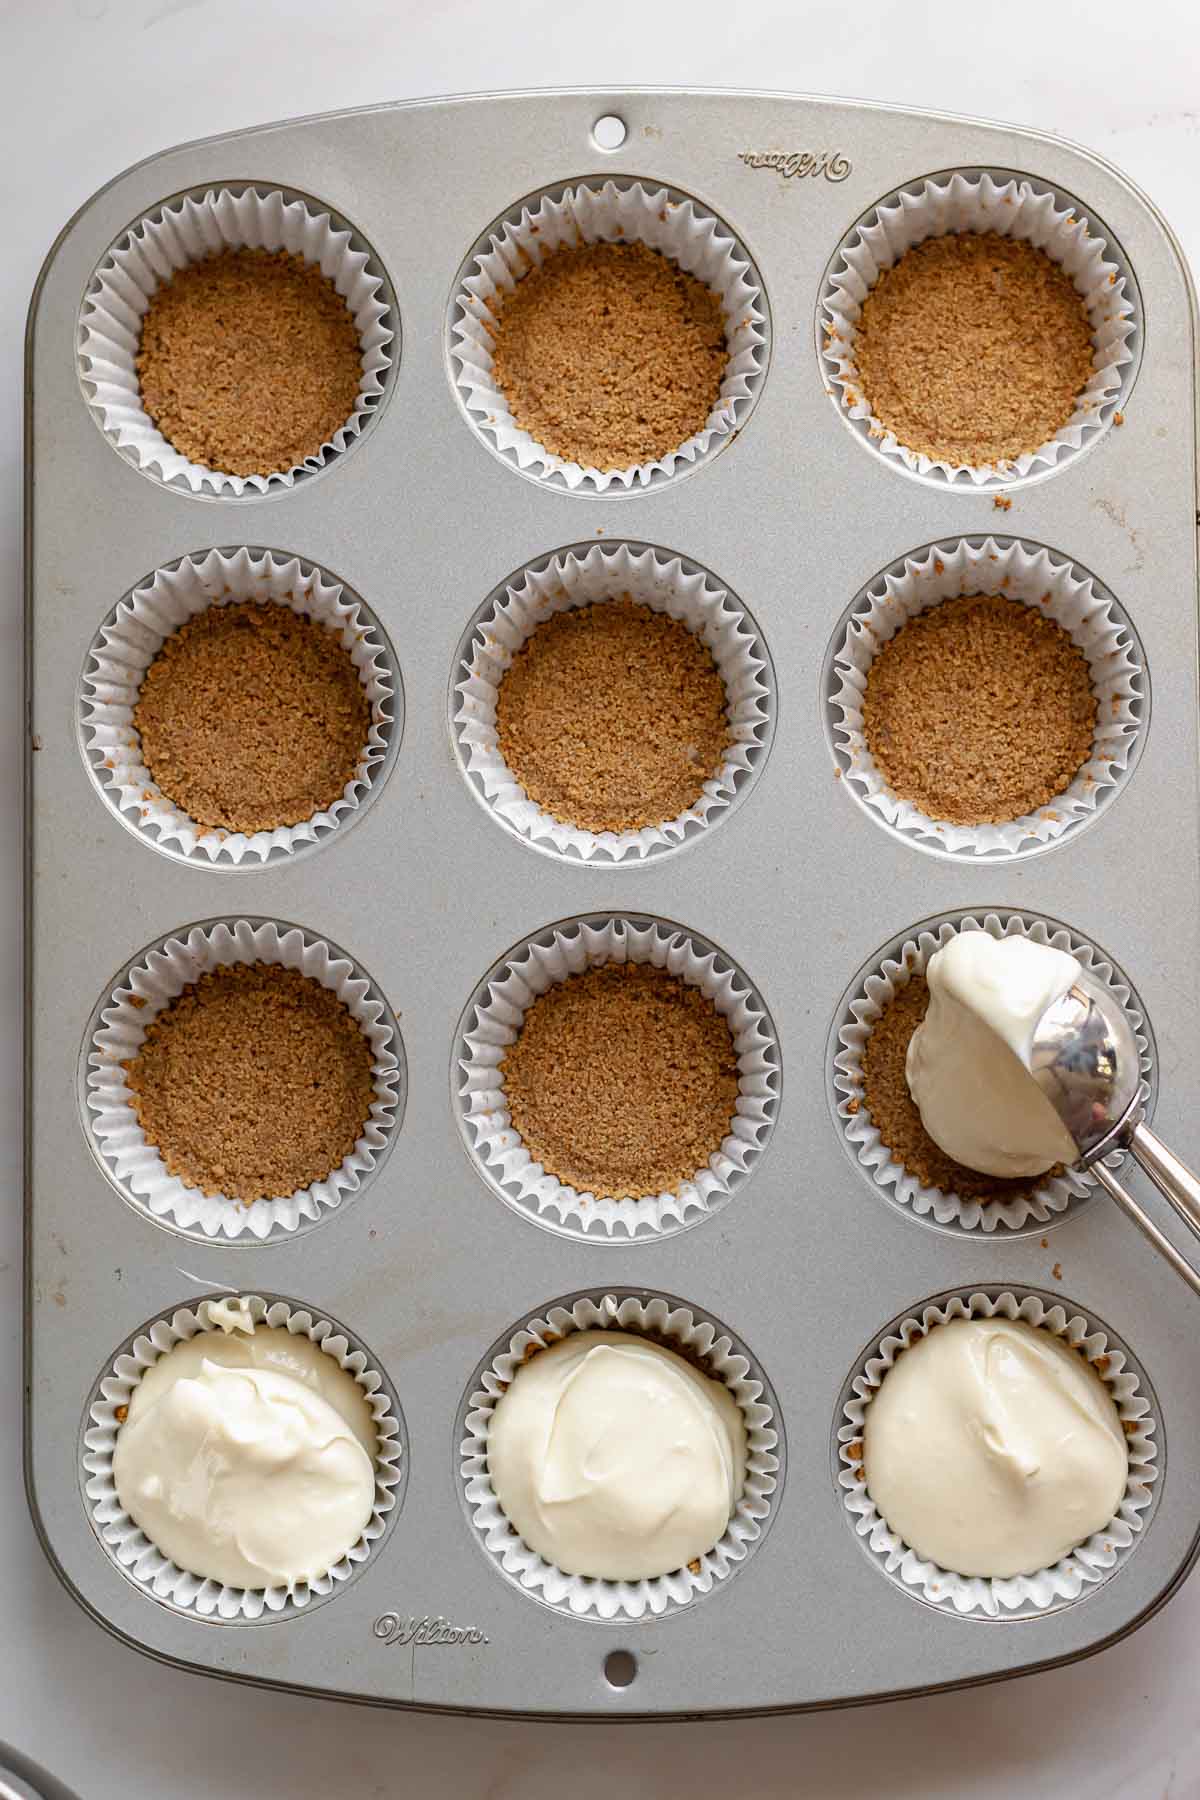 A cookie scoop adds cream cheese batter on top of the graham cracker crust.